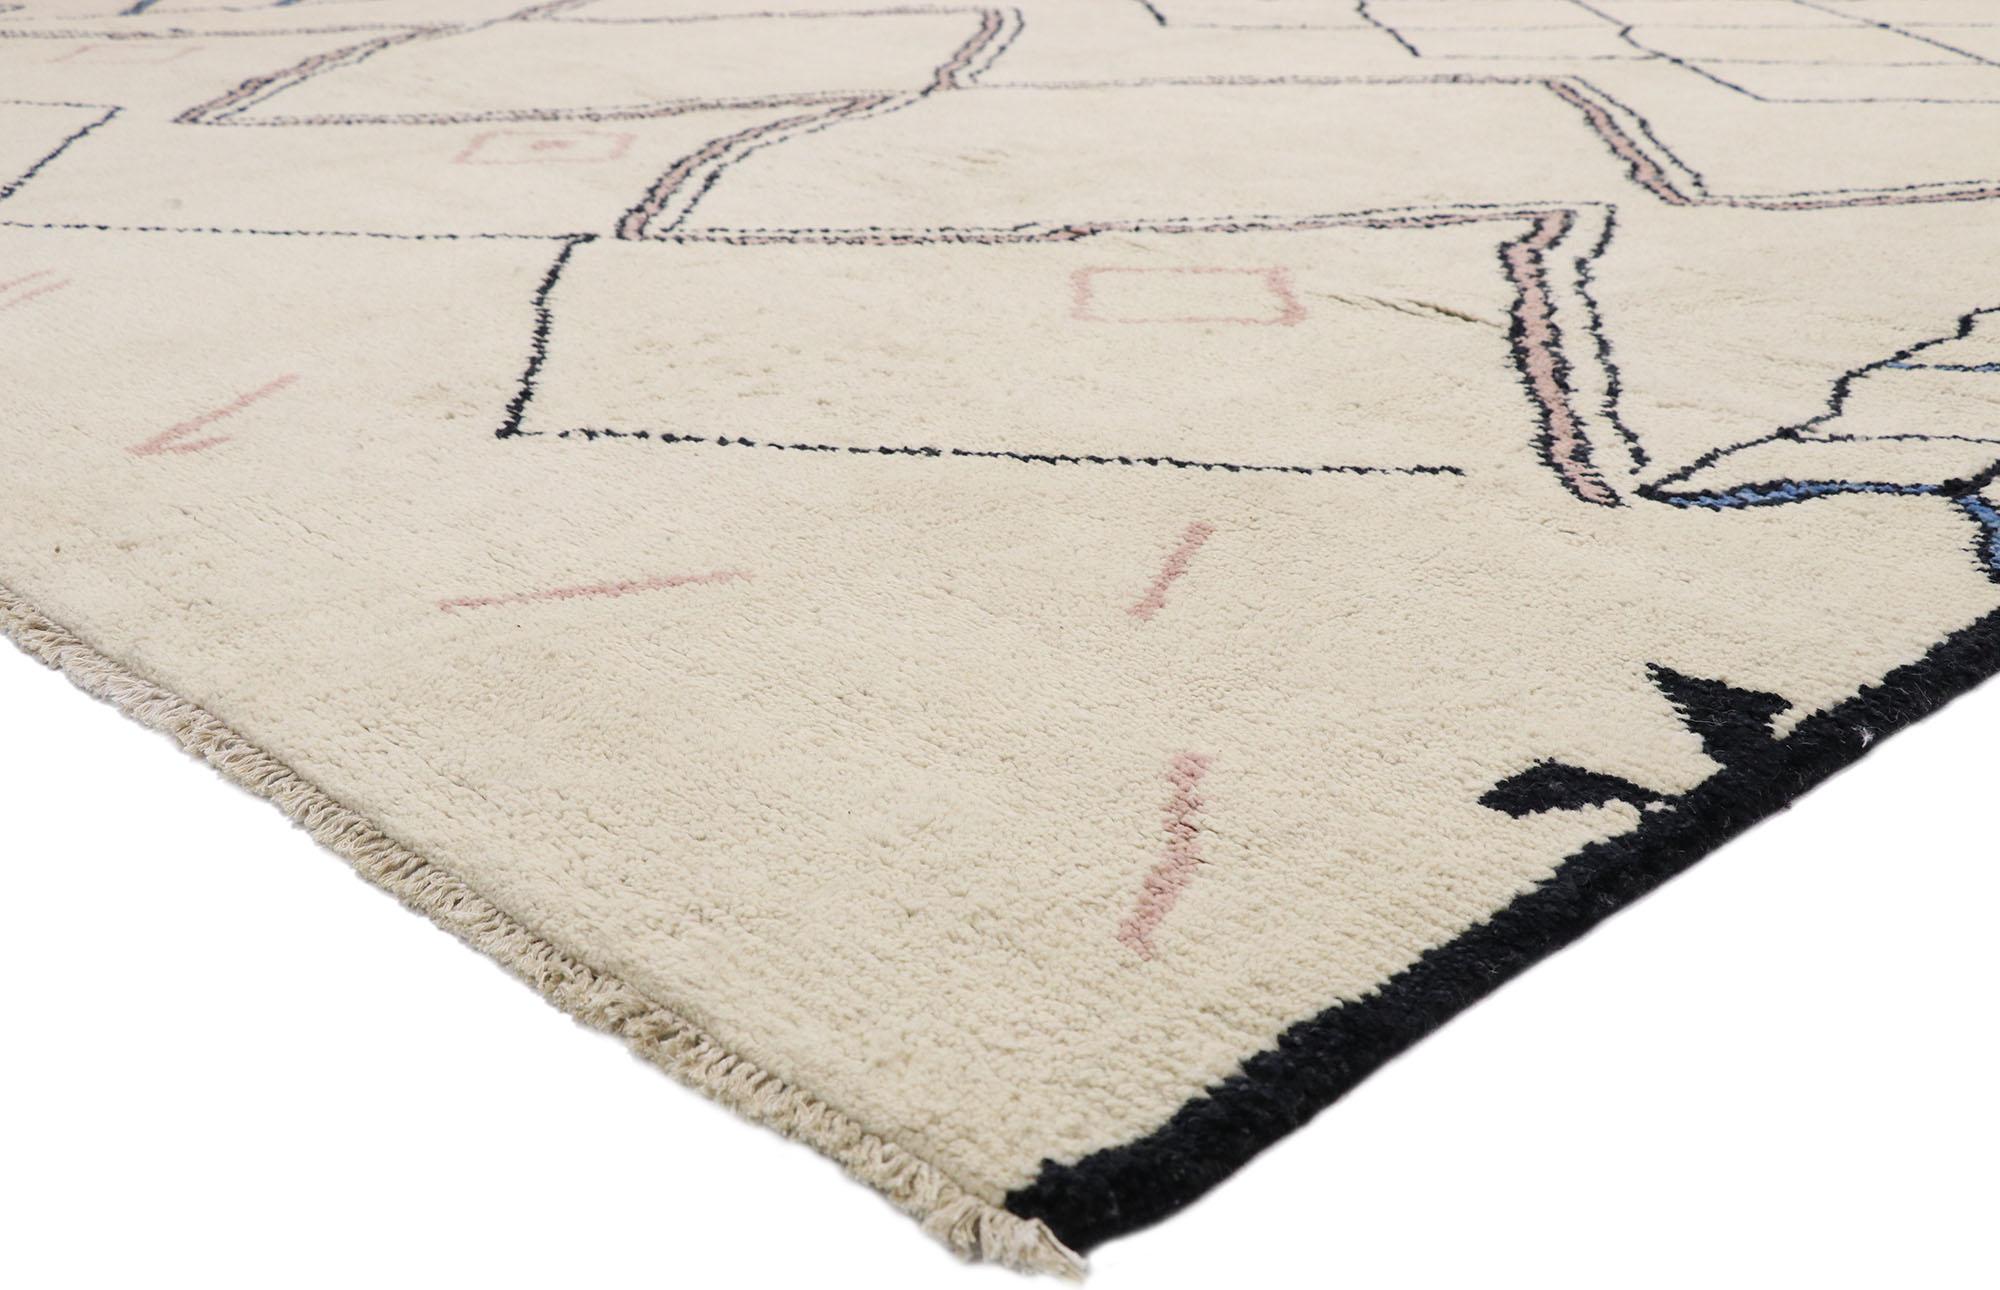 80538 Large Modern Moroccan Rug, 12'02 x 15'10.
​Cozy nomad collides with tribal enchantment in this hand knotted wool oversized Moroccan rug. The layers of divergent design and neutral color scheme weaves a spellingbinding lattice of lozenges, each